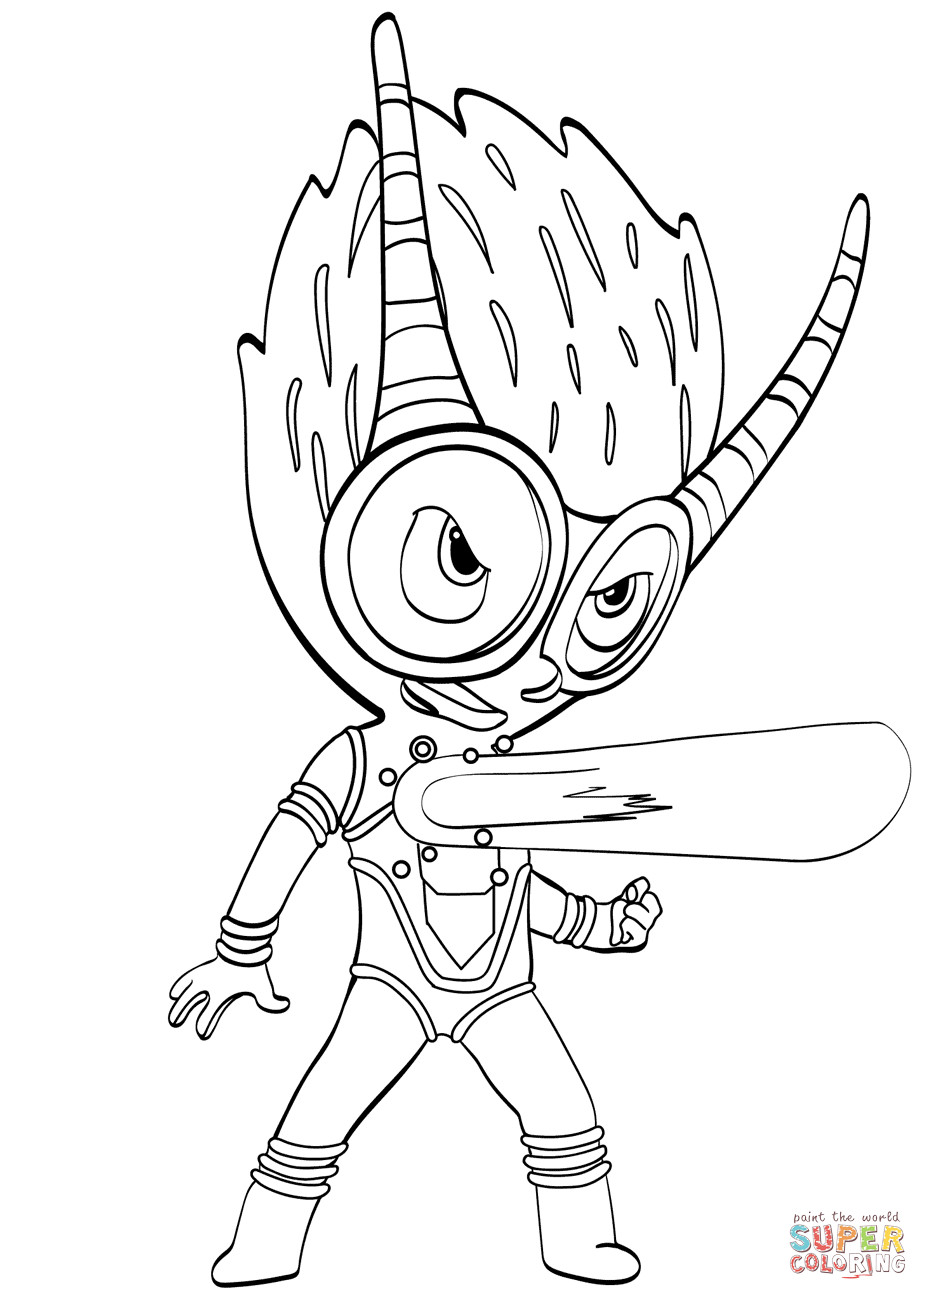 Printable Pj Mask Coloring Pages
 Firefly Villain from PJ Masks coloring page